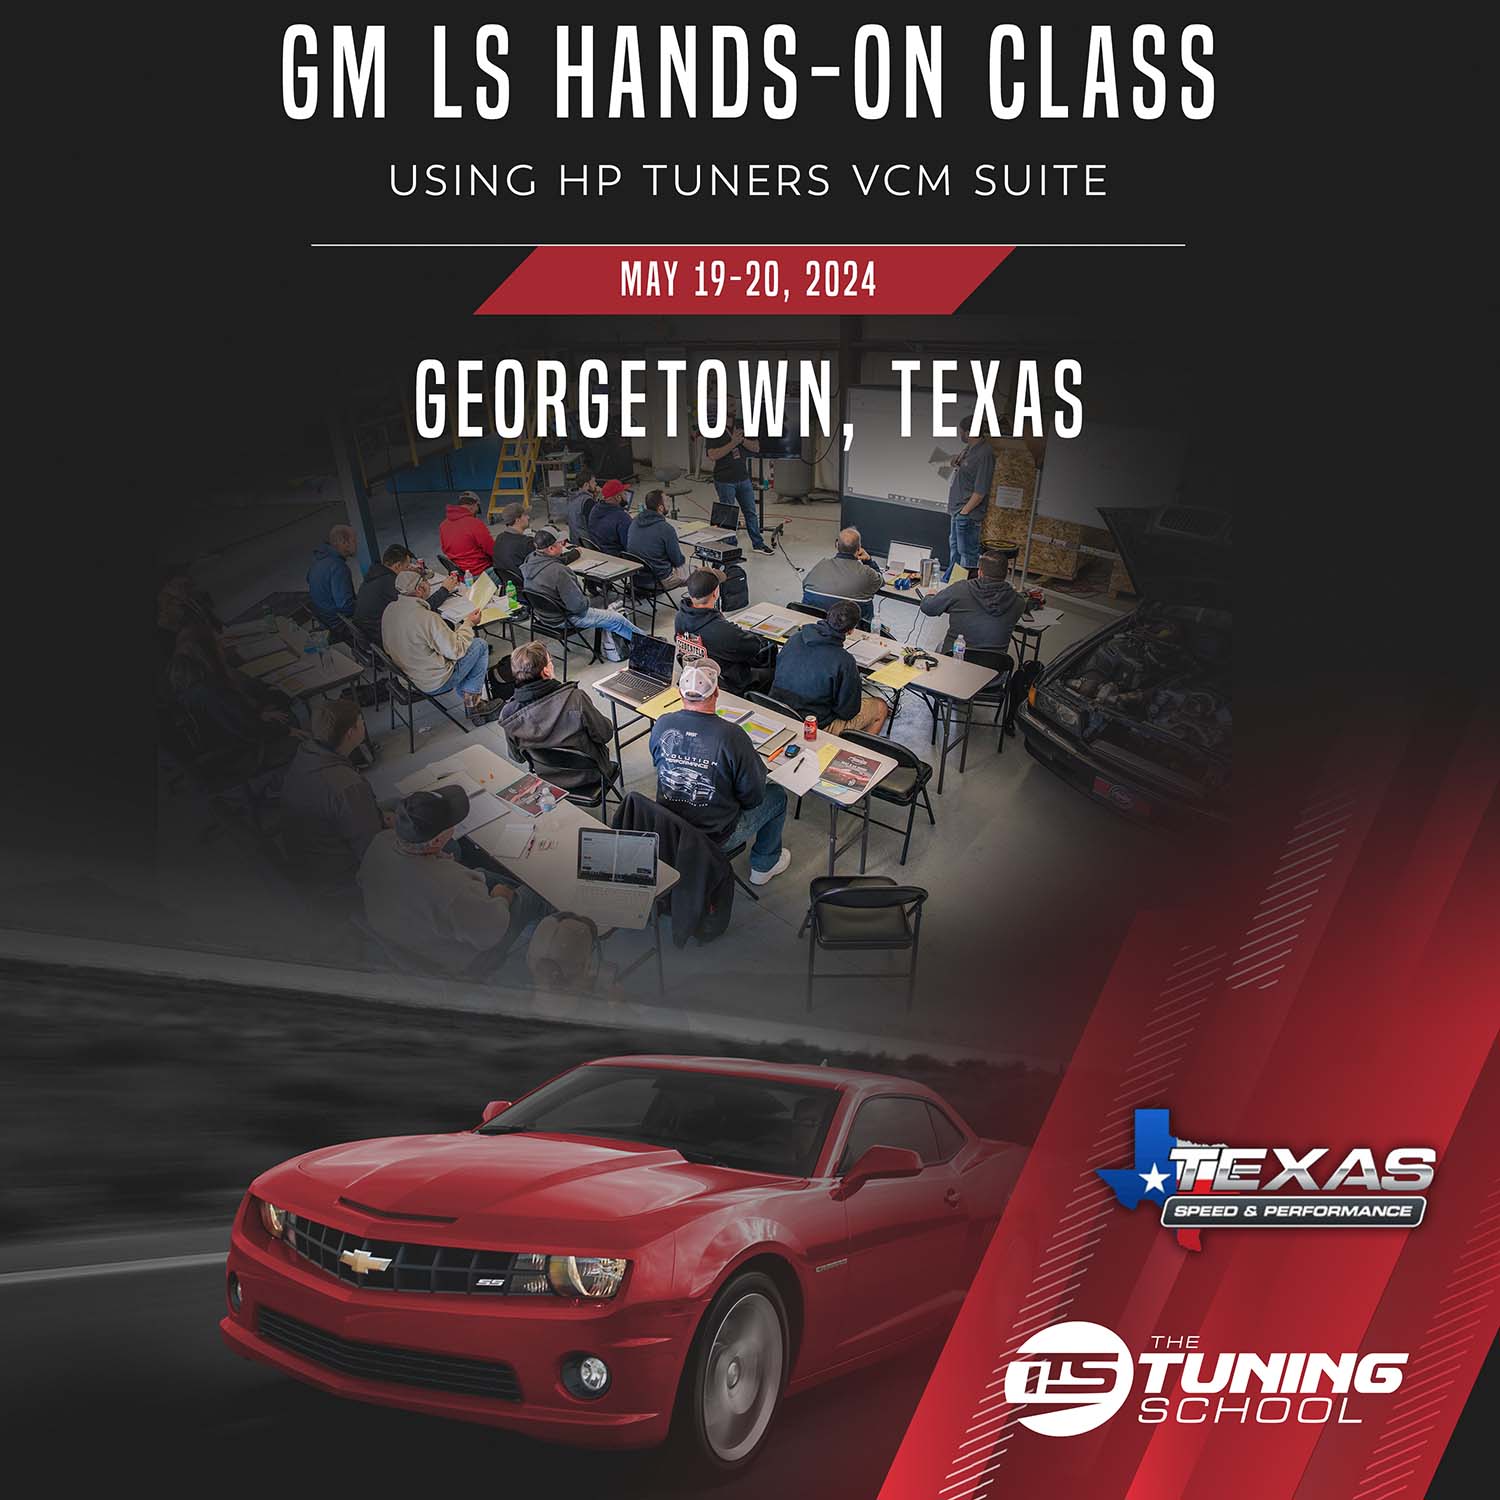 GM LS Engine Hands-On Class using HP Tuners - Georgetown, TX  May 19-20, 2024 NO PRINTED COURSE